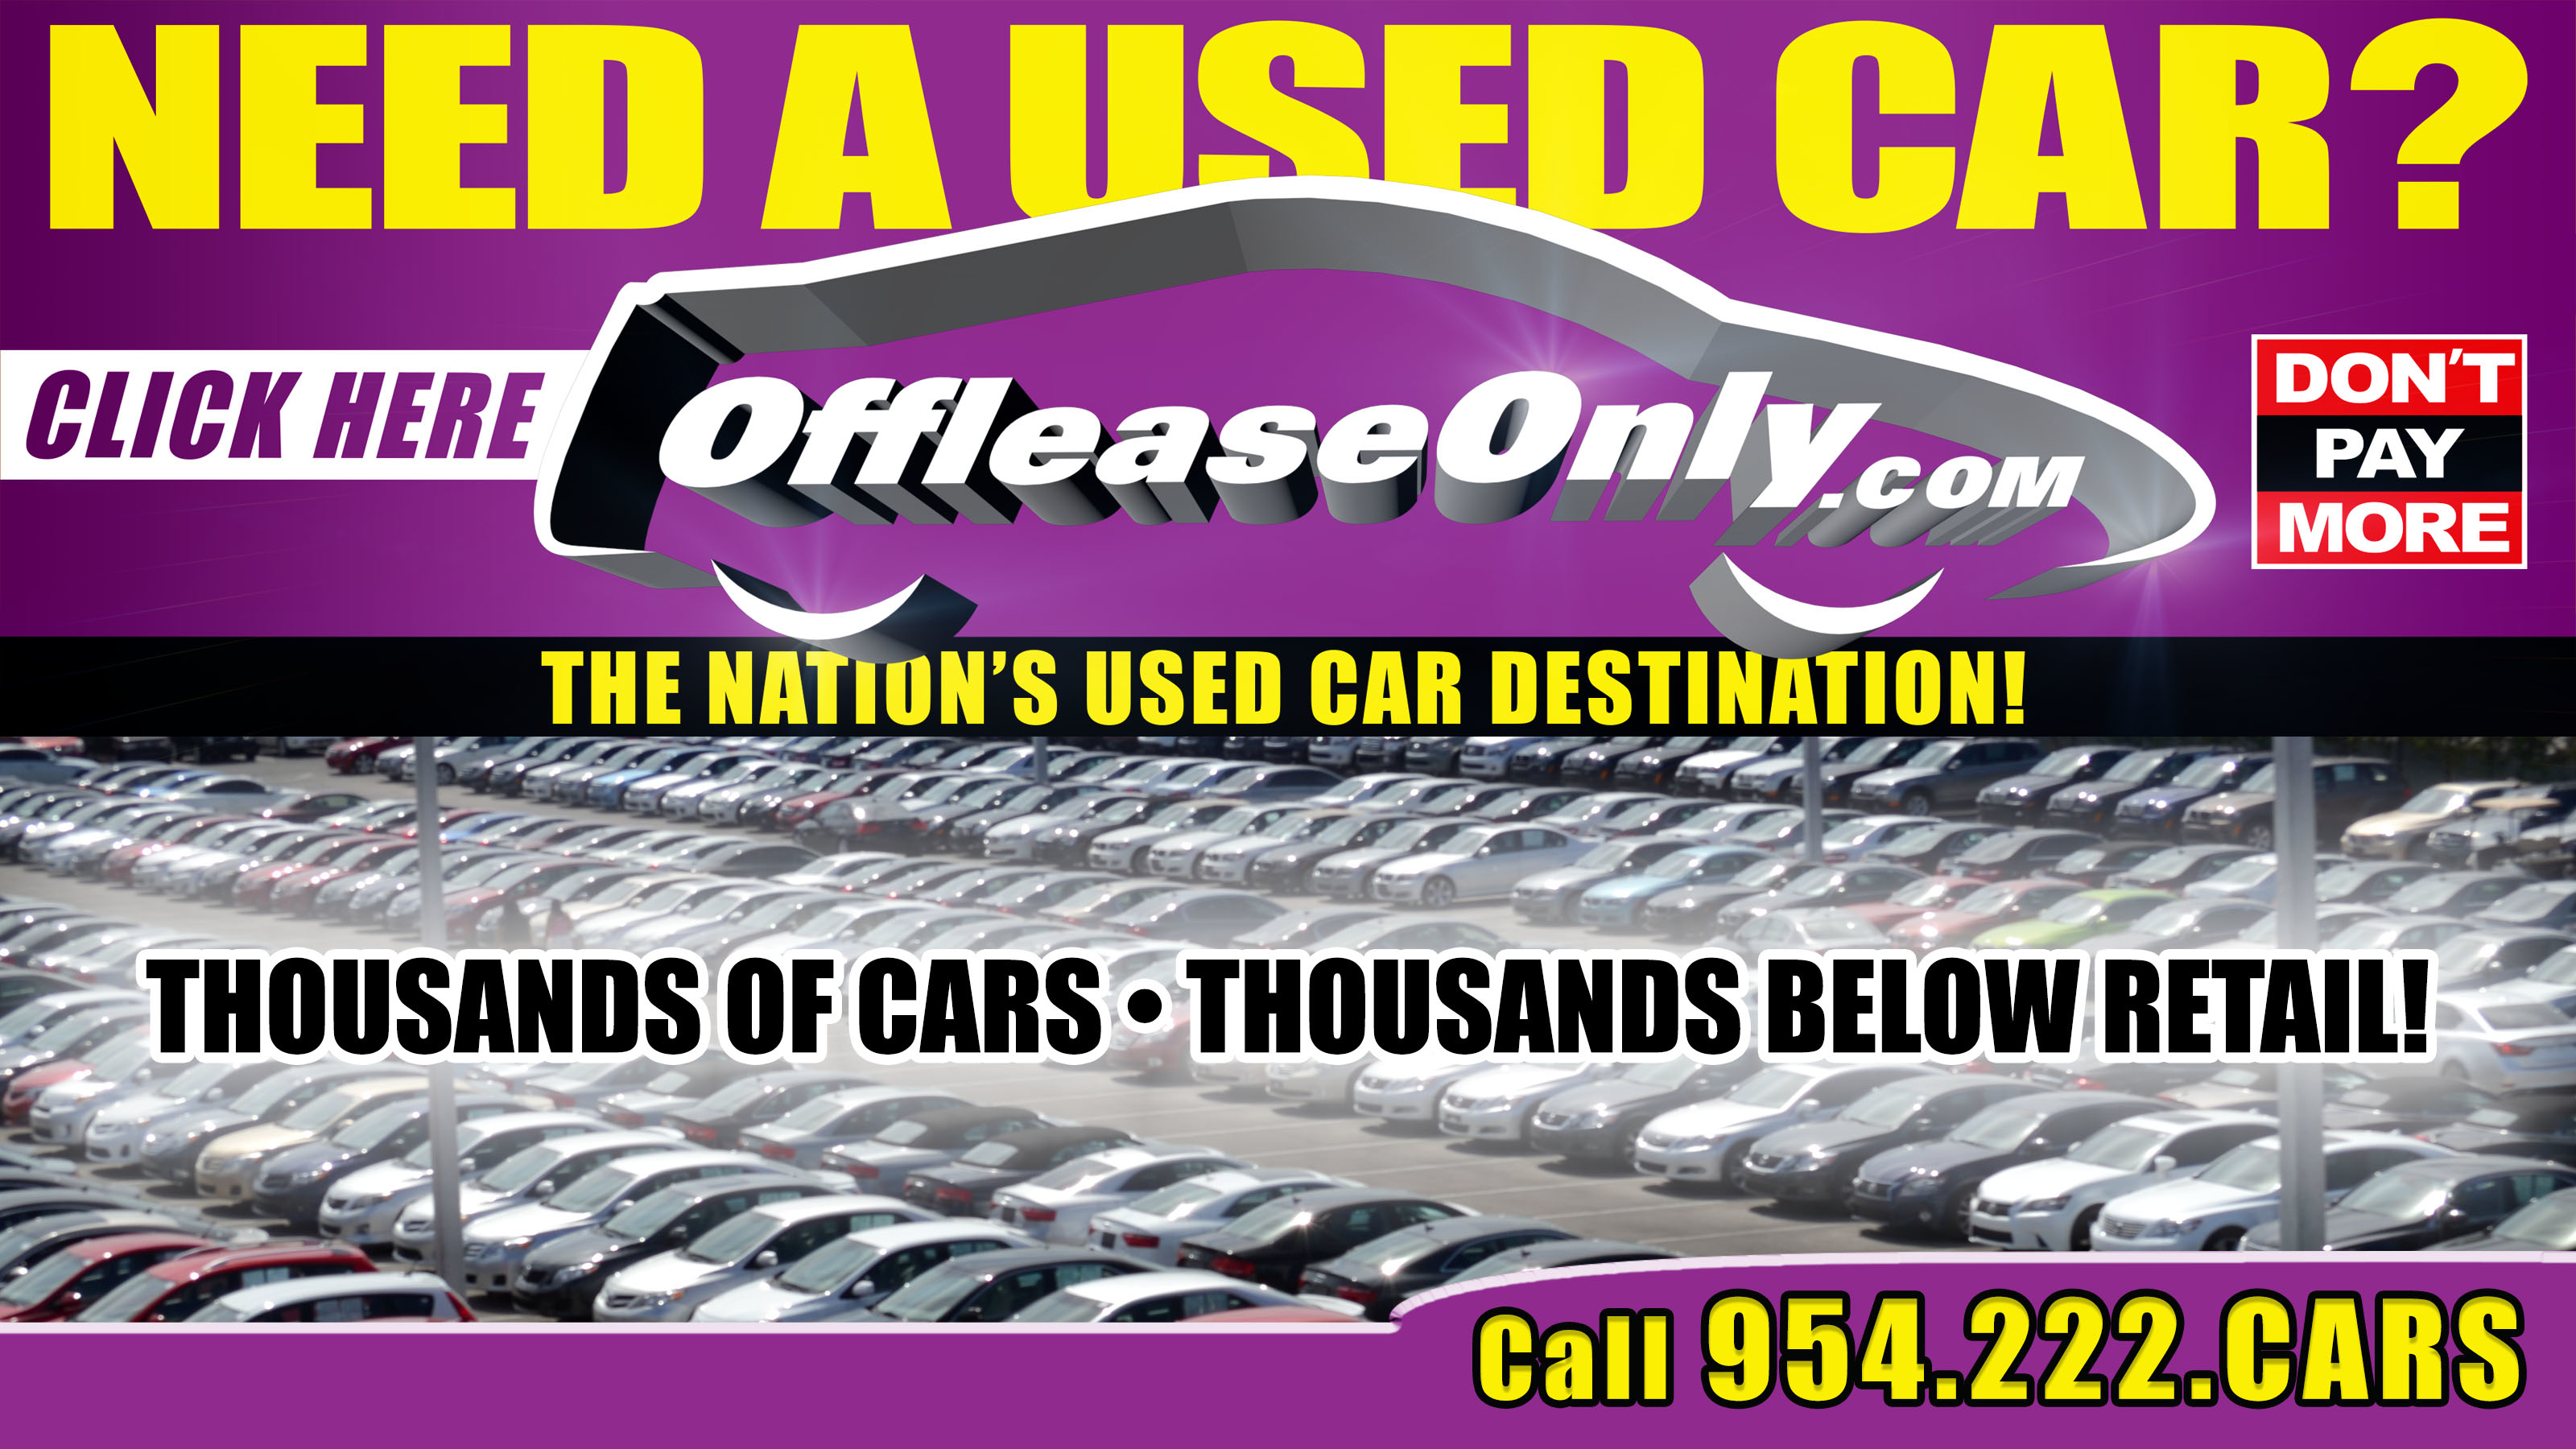 Off lease only fort lauderdale reviews